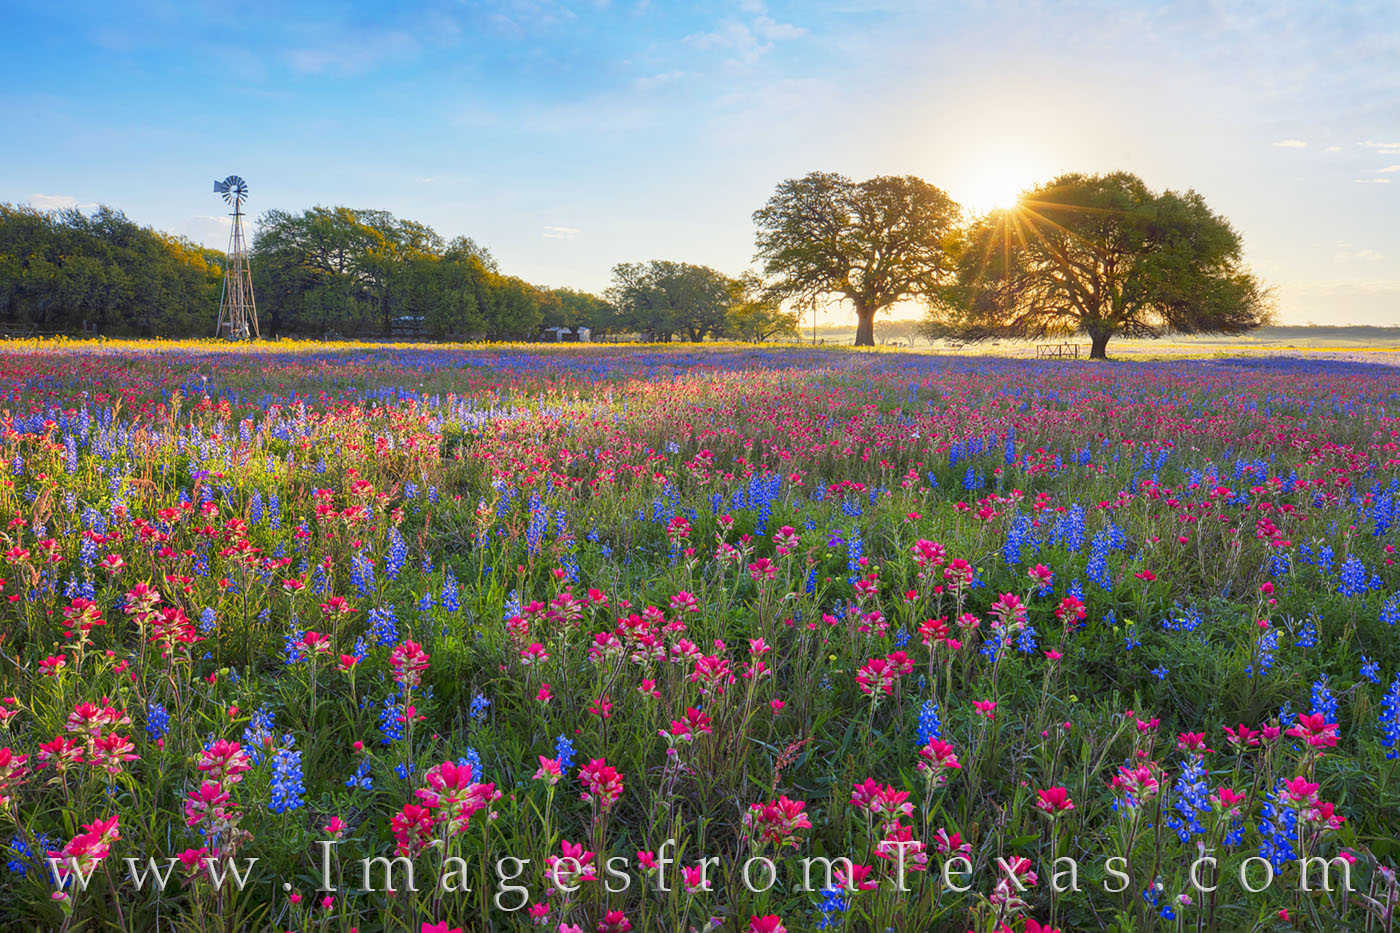 Morning light streams through an old oak tree as a vibrant field of bluebonnets and Indian paintbrush awaken to a new spring...